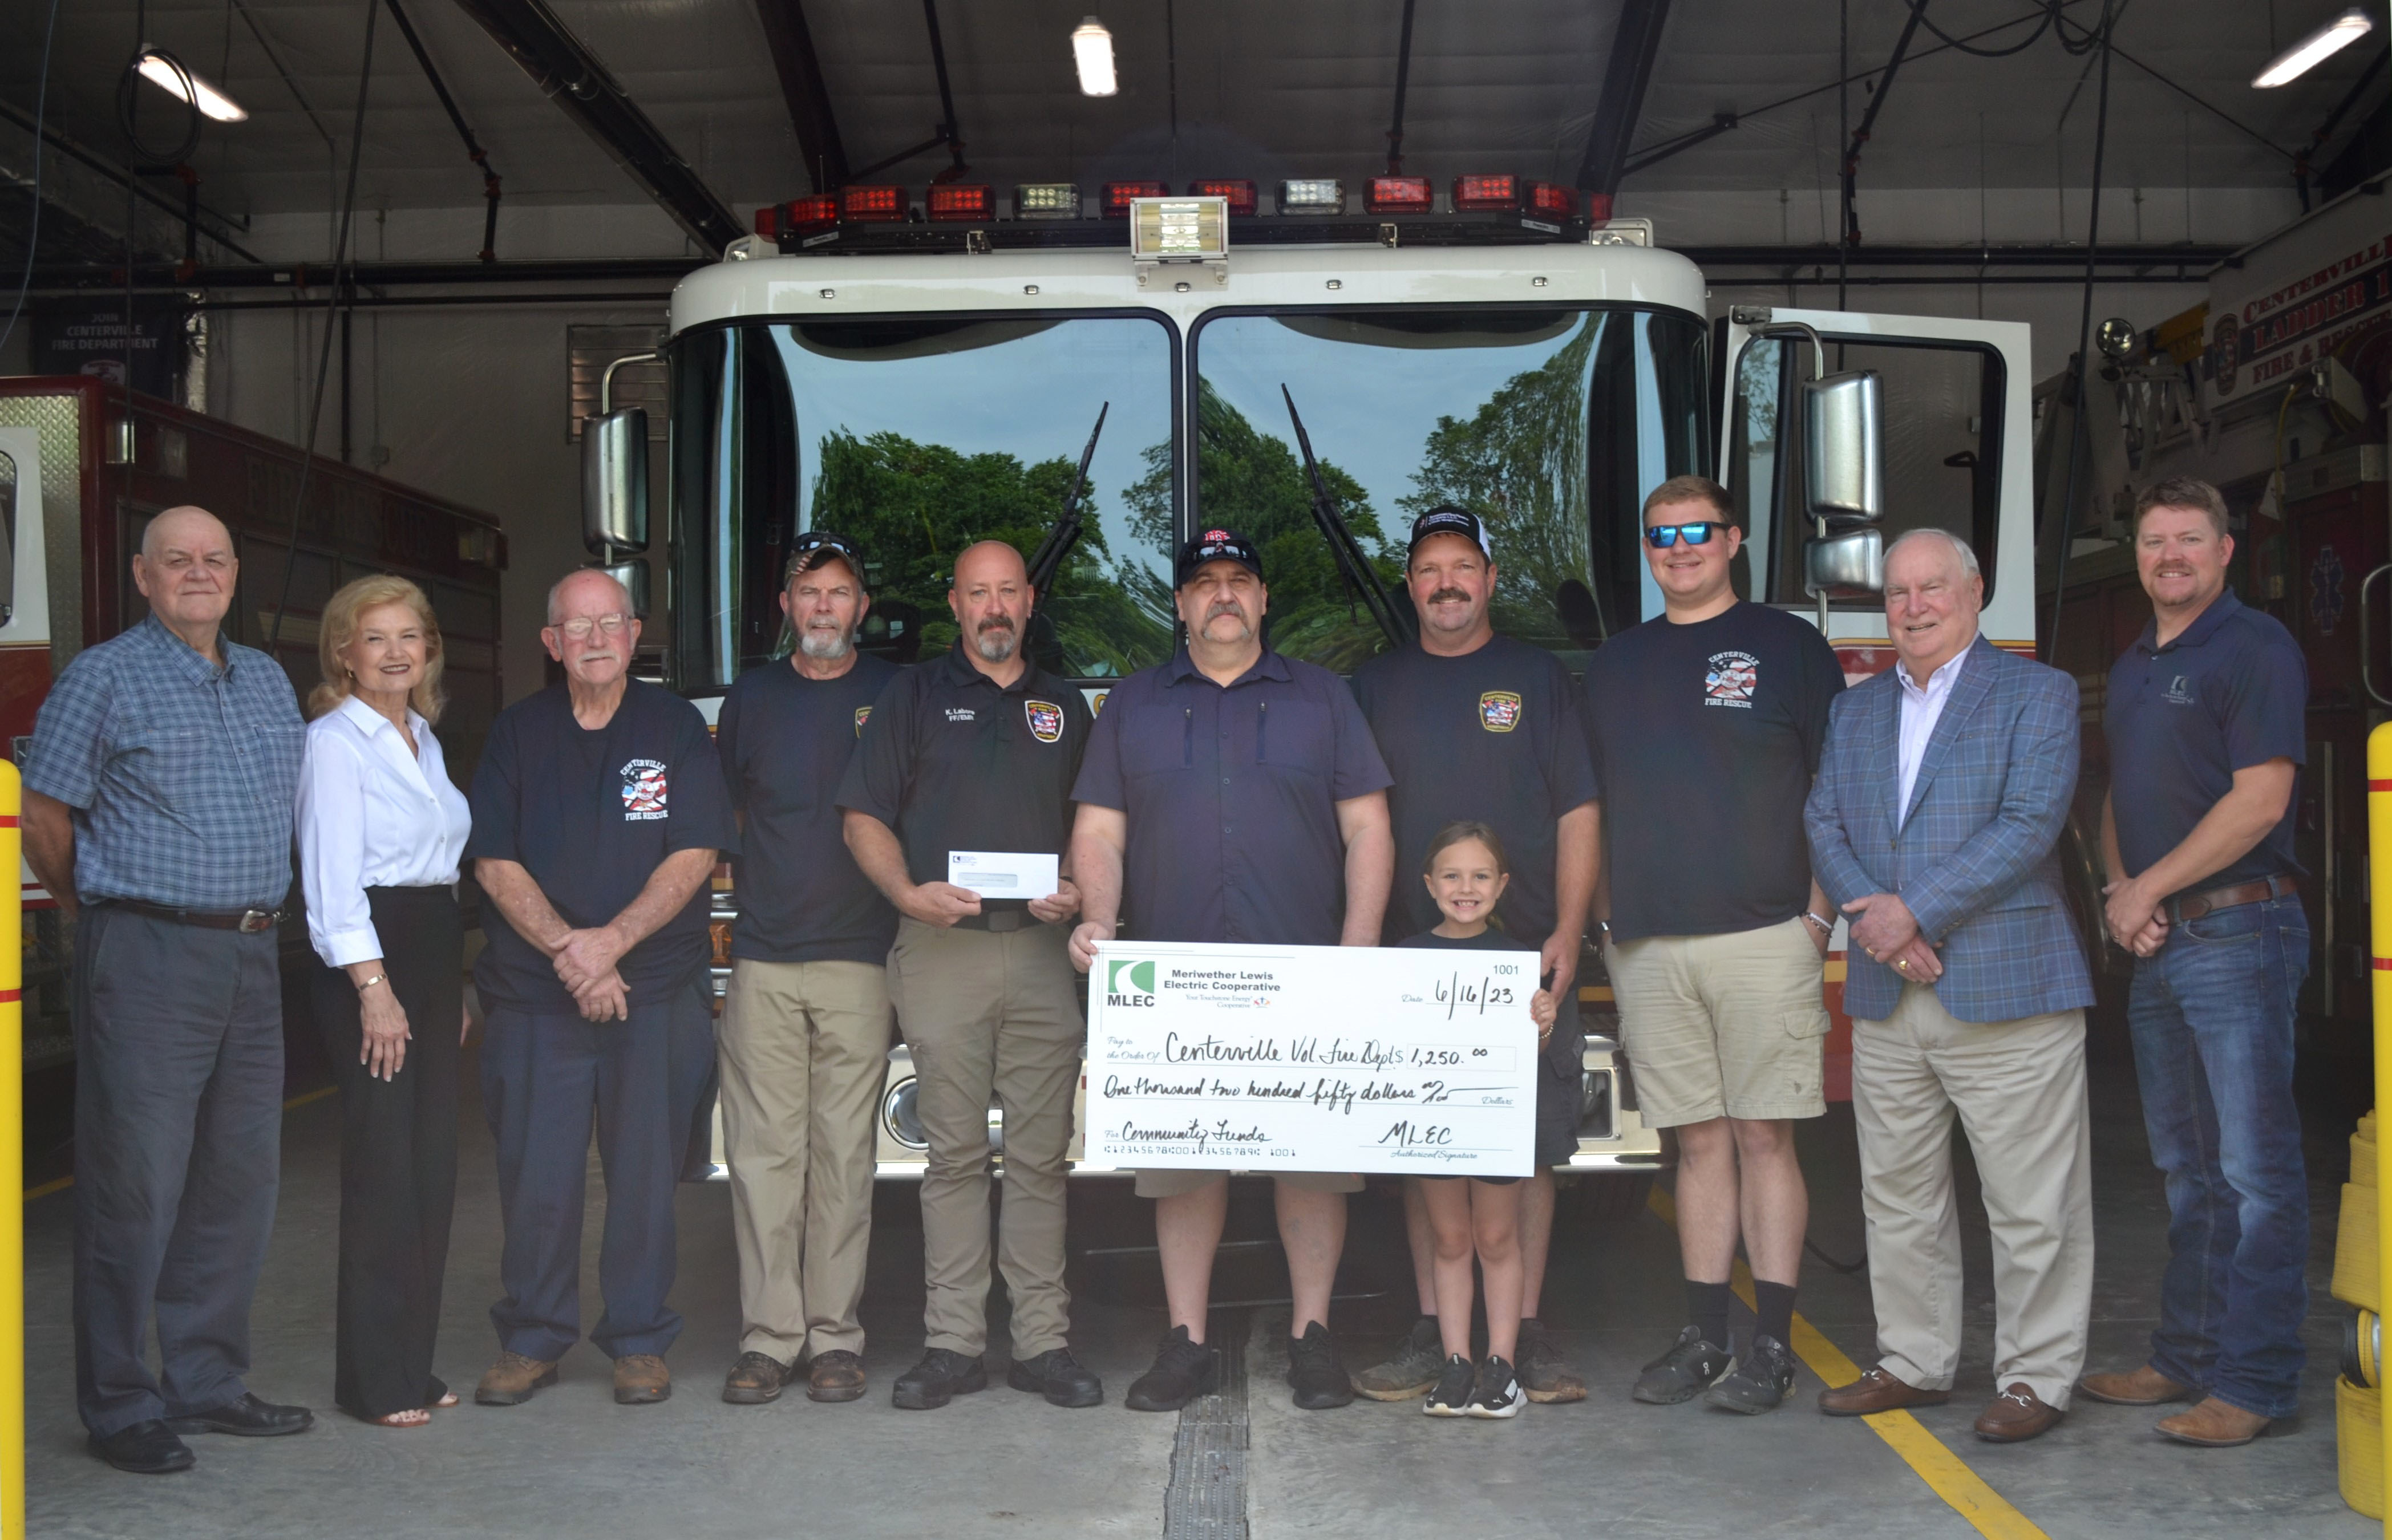 Pictured from left to right: MLEC Directors Wayne Qualls and Johnnie Ruth Elrod; Centerville Firefighters Charles Horner, Marvin Dorton, Kyle Labore, Jason Dotson, Centerville Fire Captain Greg Johnston and granddaughter Tinslee, and Firefighter McKale Baltz; MLEC Director Dr. Zack Hutchens, and District Manager Matthew Chessor.